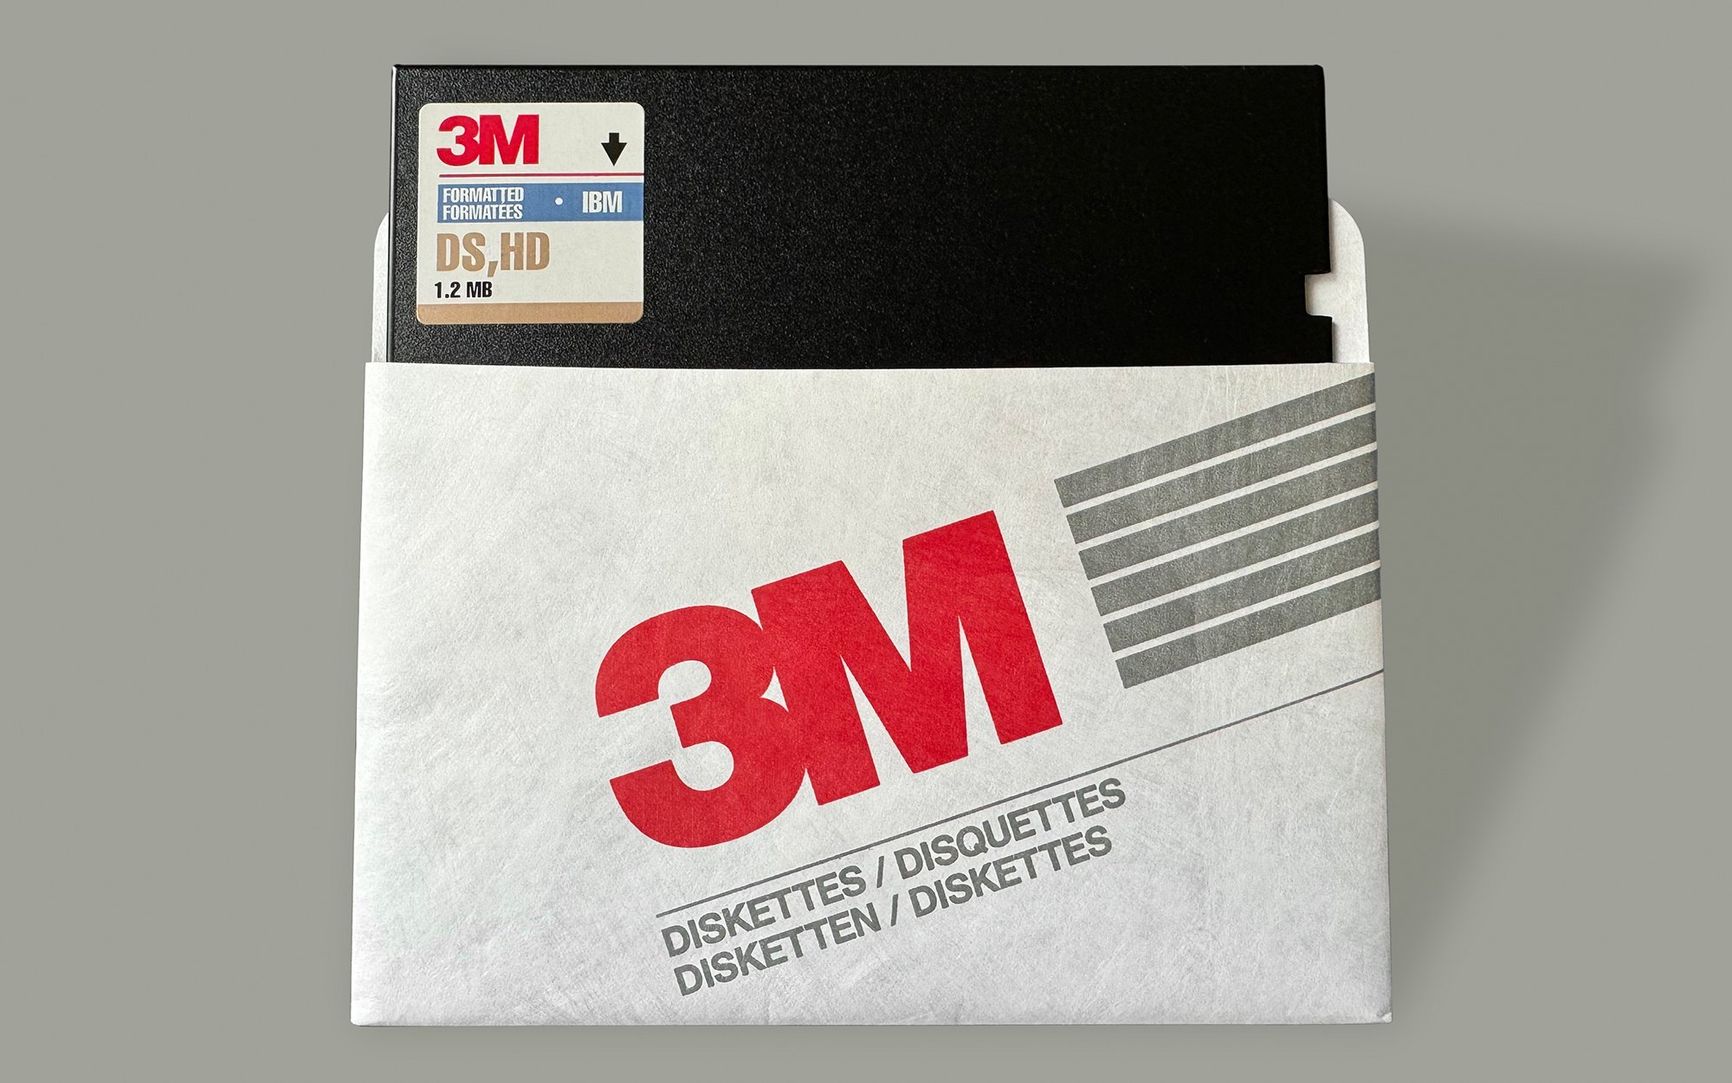 One 3M 5 \u00bc\u201d Floppy disk in a sleeve stands against a gray background.